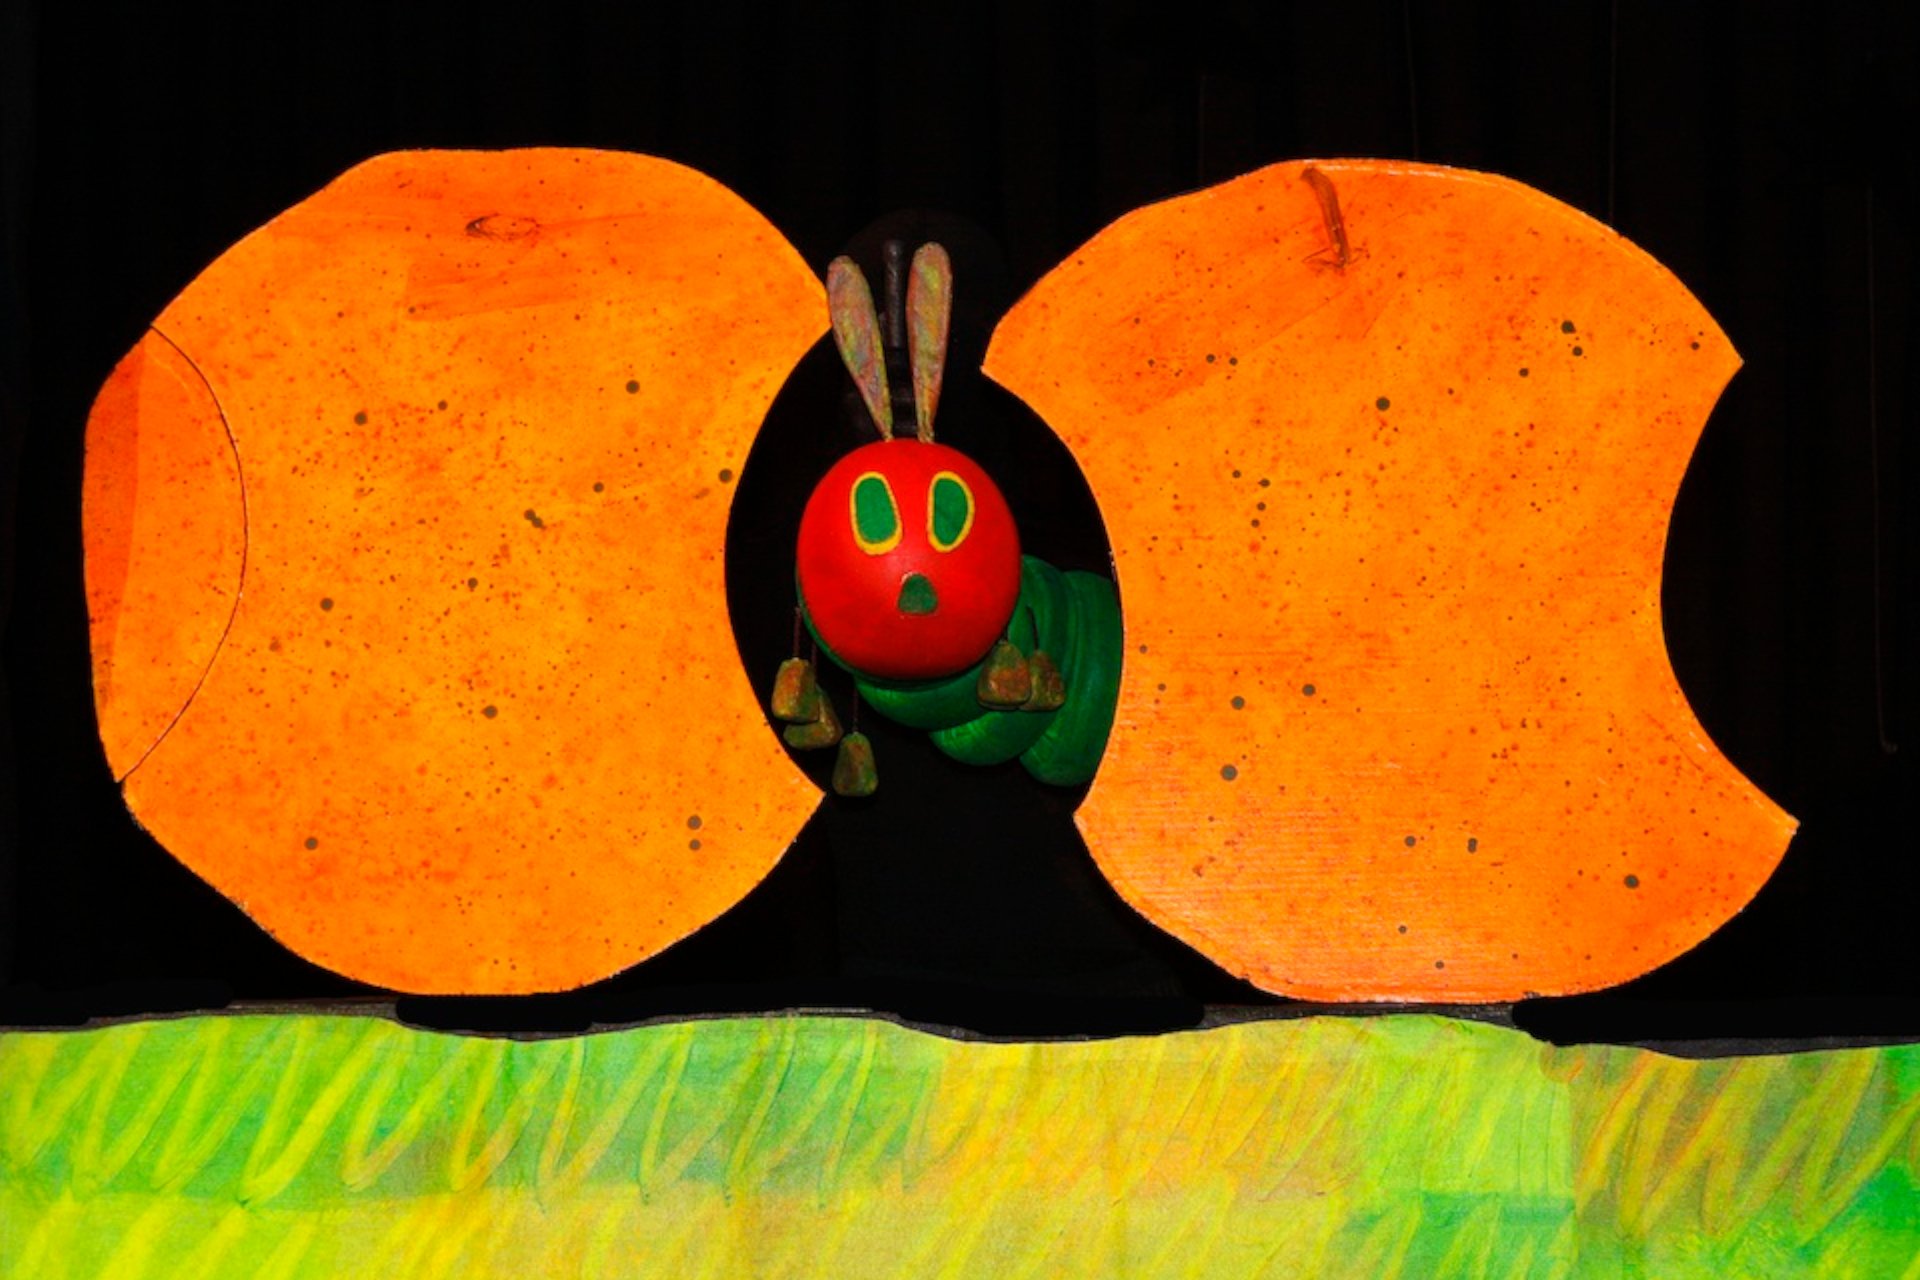 The Very Hungry Caterpillar Miami Dade County Auditorium